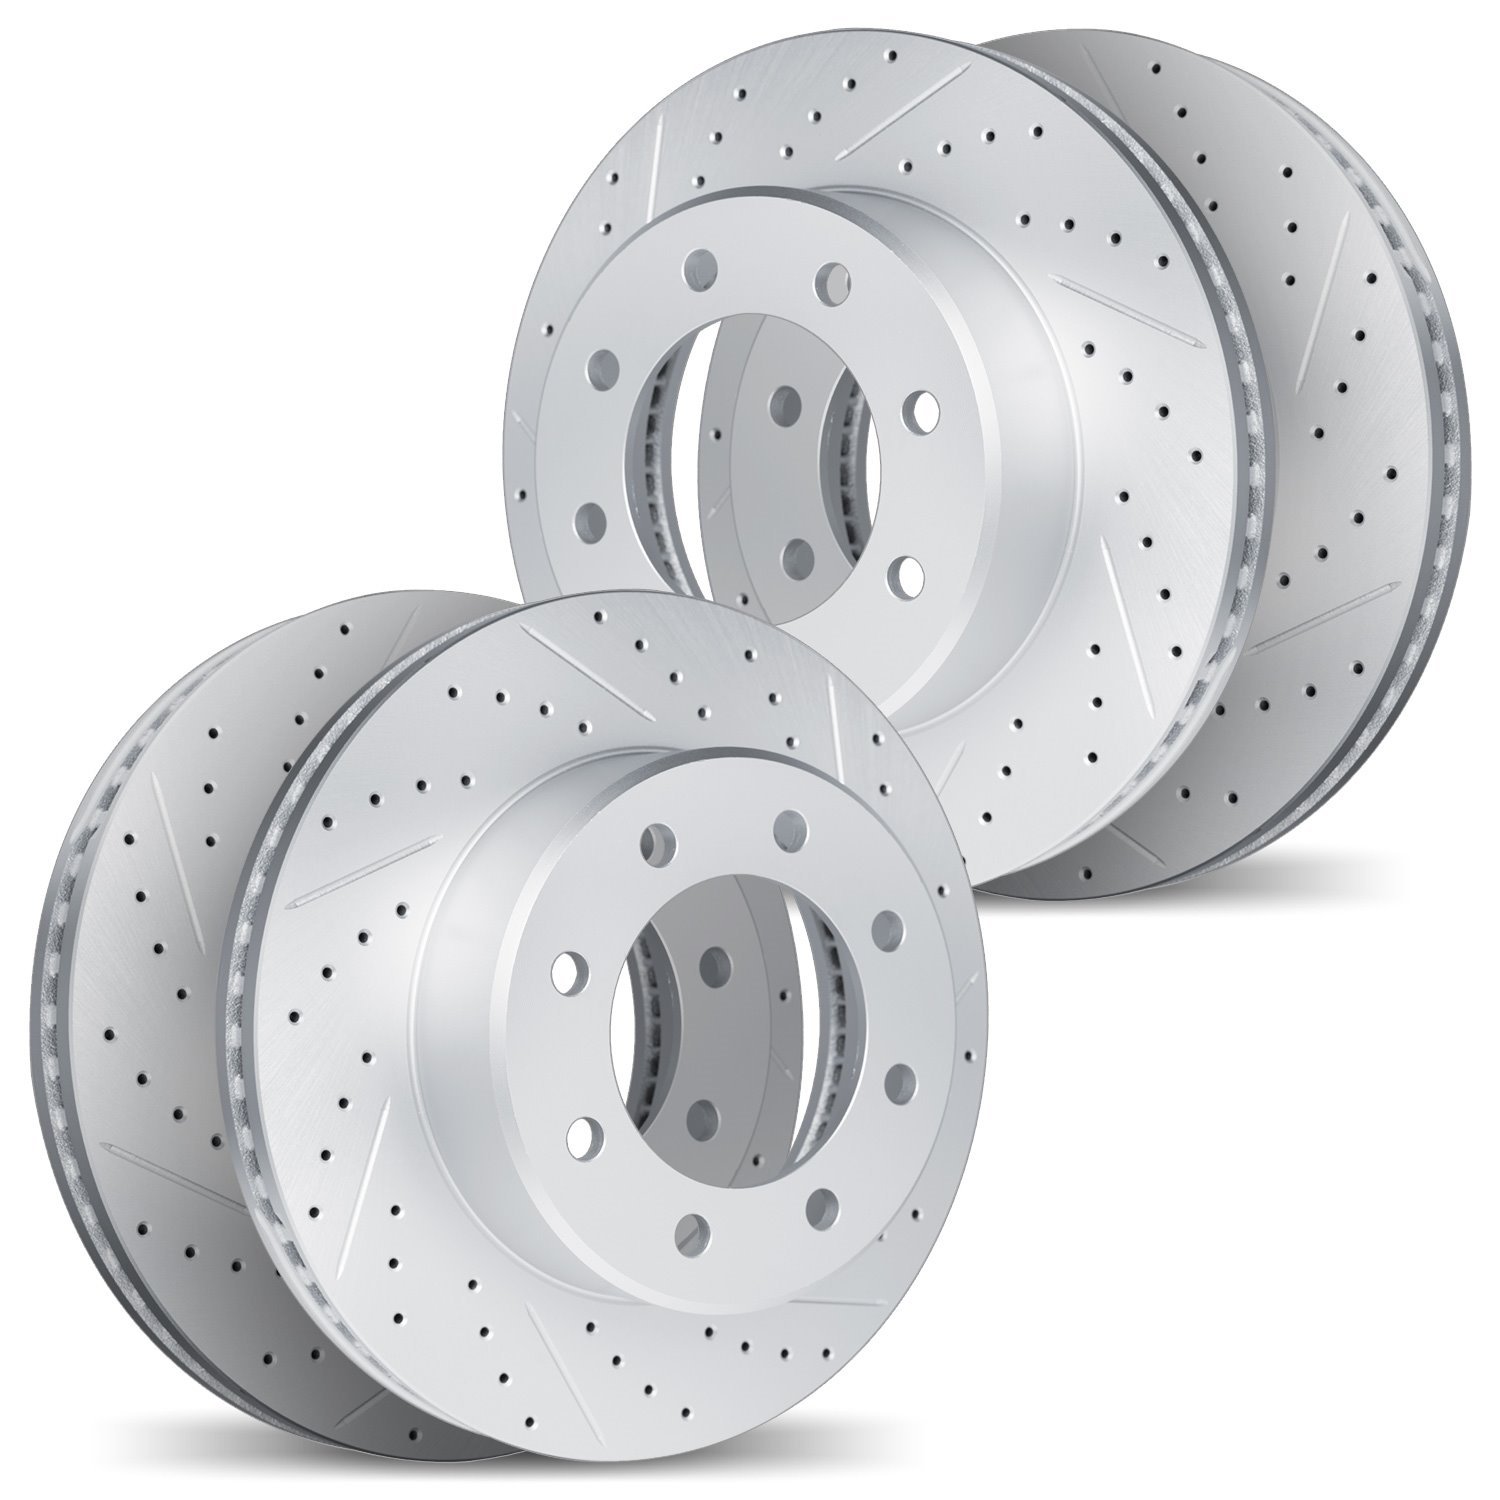 2004-40042 Geoperformance Drilled/Slotted Brake Rotors, 2003-2008 Mopar, Position: Front and Rear